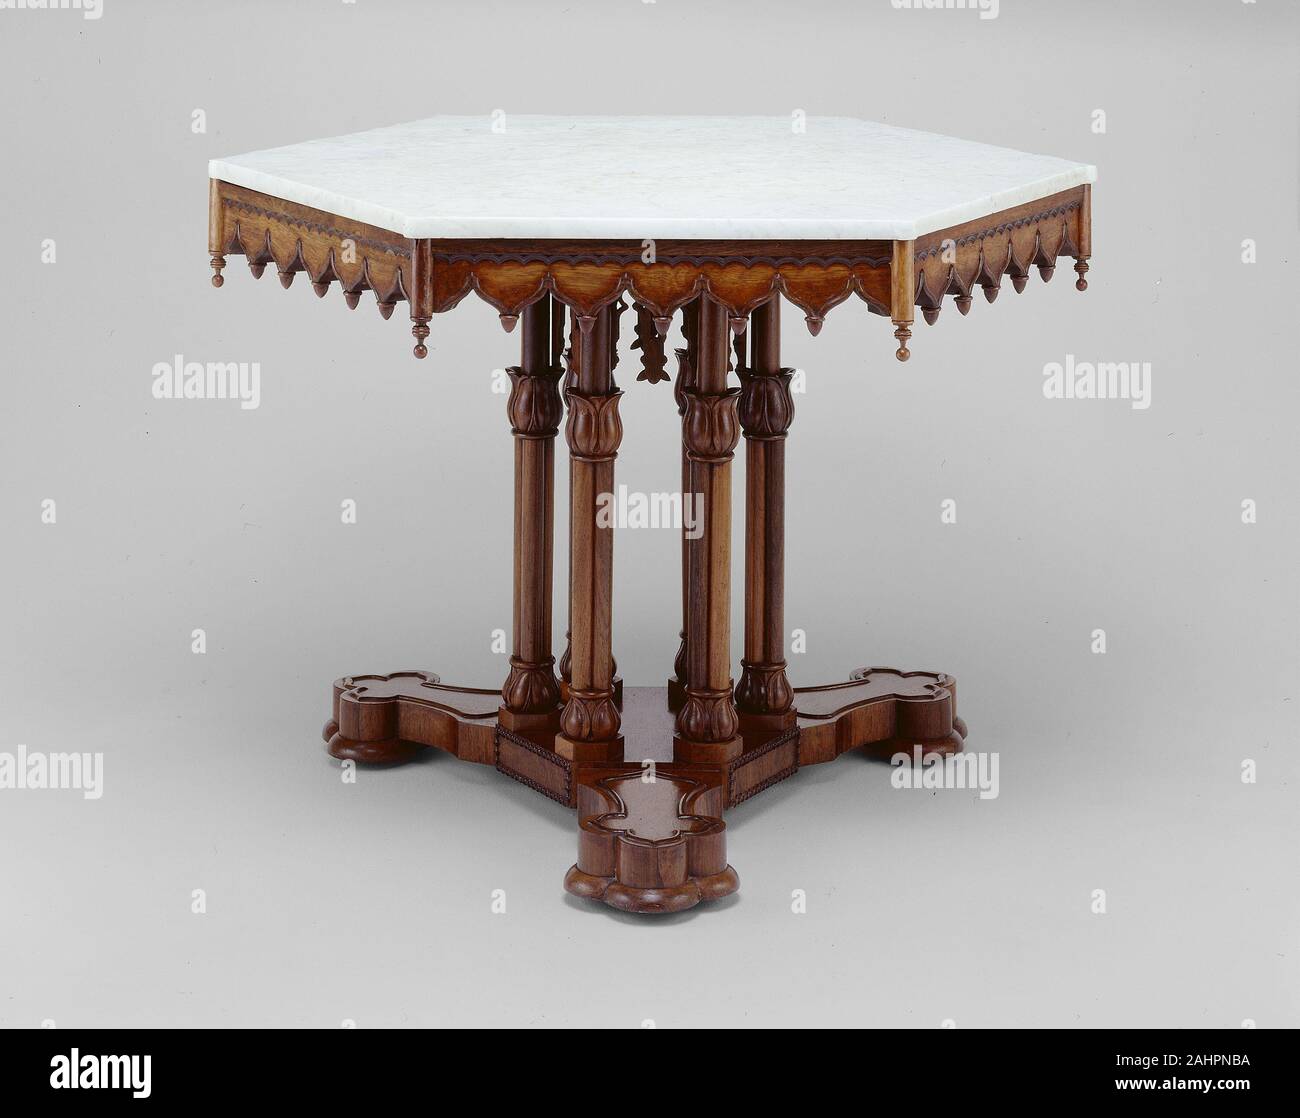 Alexander Roux. Belmead Center table. 1846. New York City. Rosewood, oak, walnut, marble In 1845 Alexander Jackson Davis designed Belmead, a magnificent Gothic Revival villa, for the prominent builder Philip St. George Cocke of Powhatan County, Virginia. In addition to designing Belmead’s exterior, Davis also designed furniture for the interior, notably a parlor set that included the side chairs (1998.565.1-2). The table descended in the Cocke family along with the parlor set and, remarkably, retains its original marble top and intricately carved tracery lantern. Fitted between the supporting Stock Photo